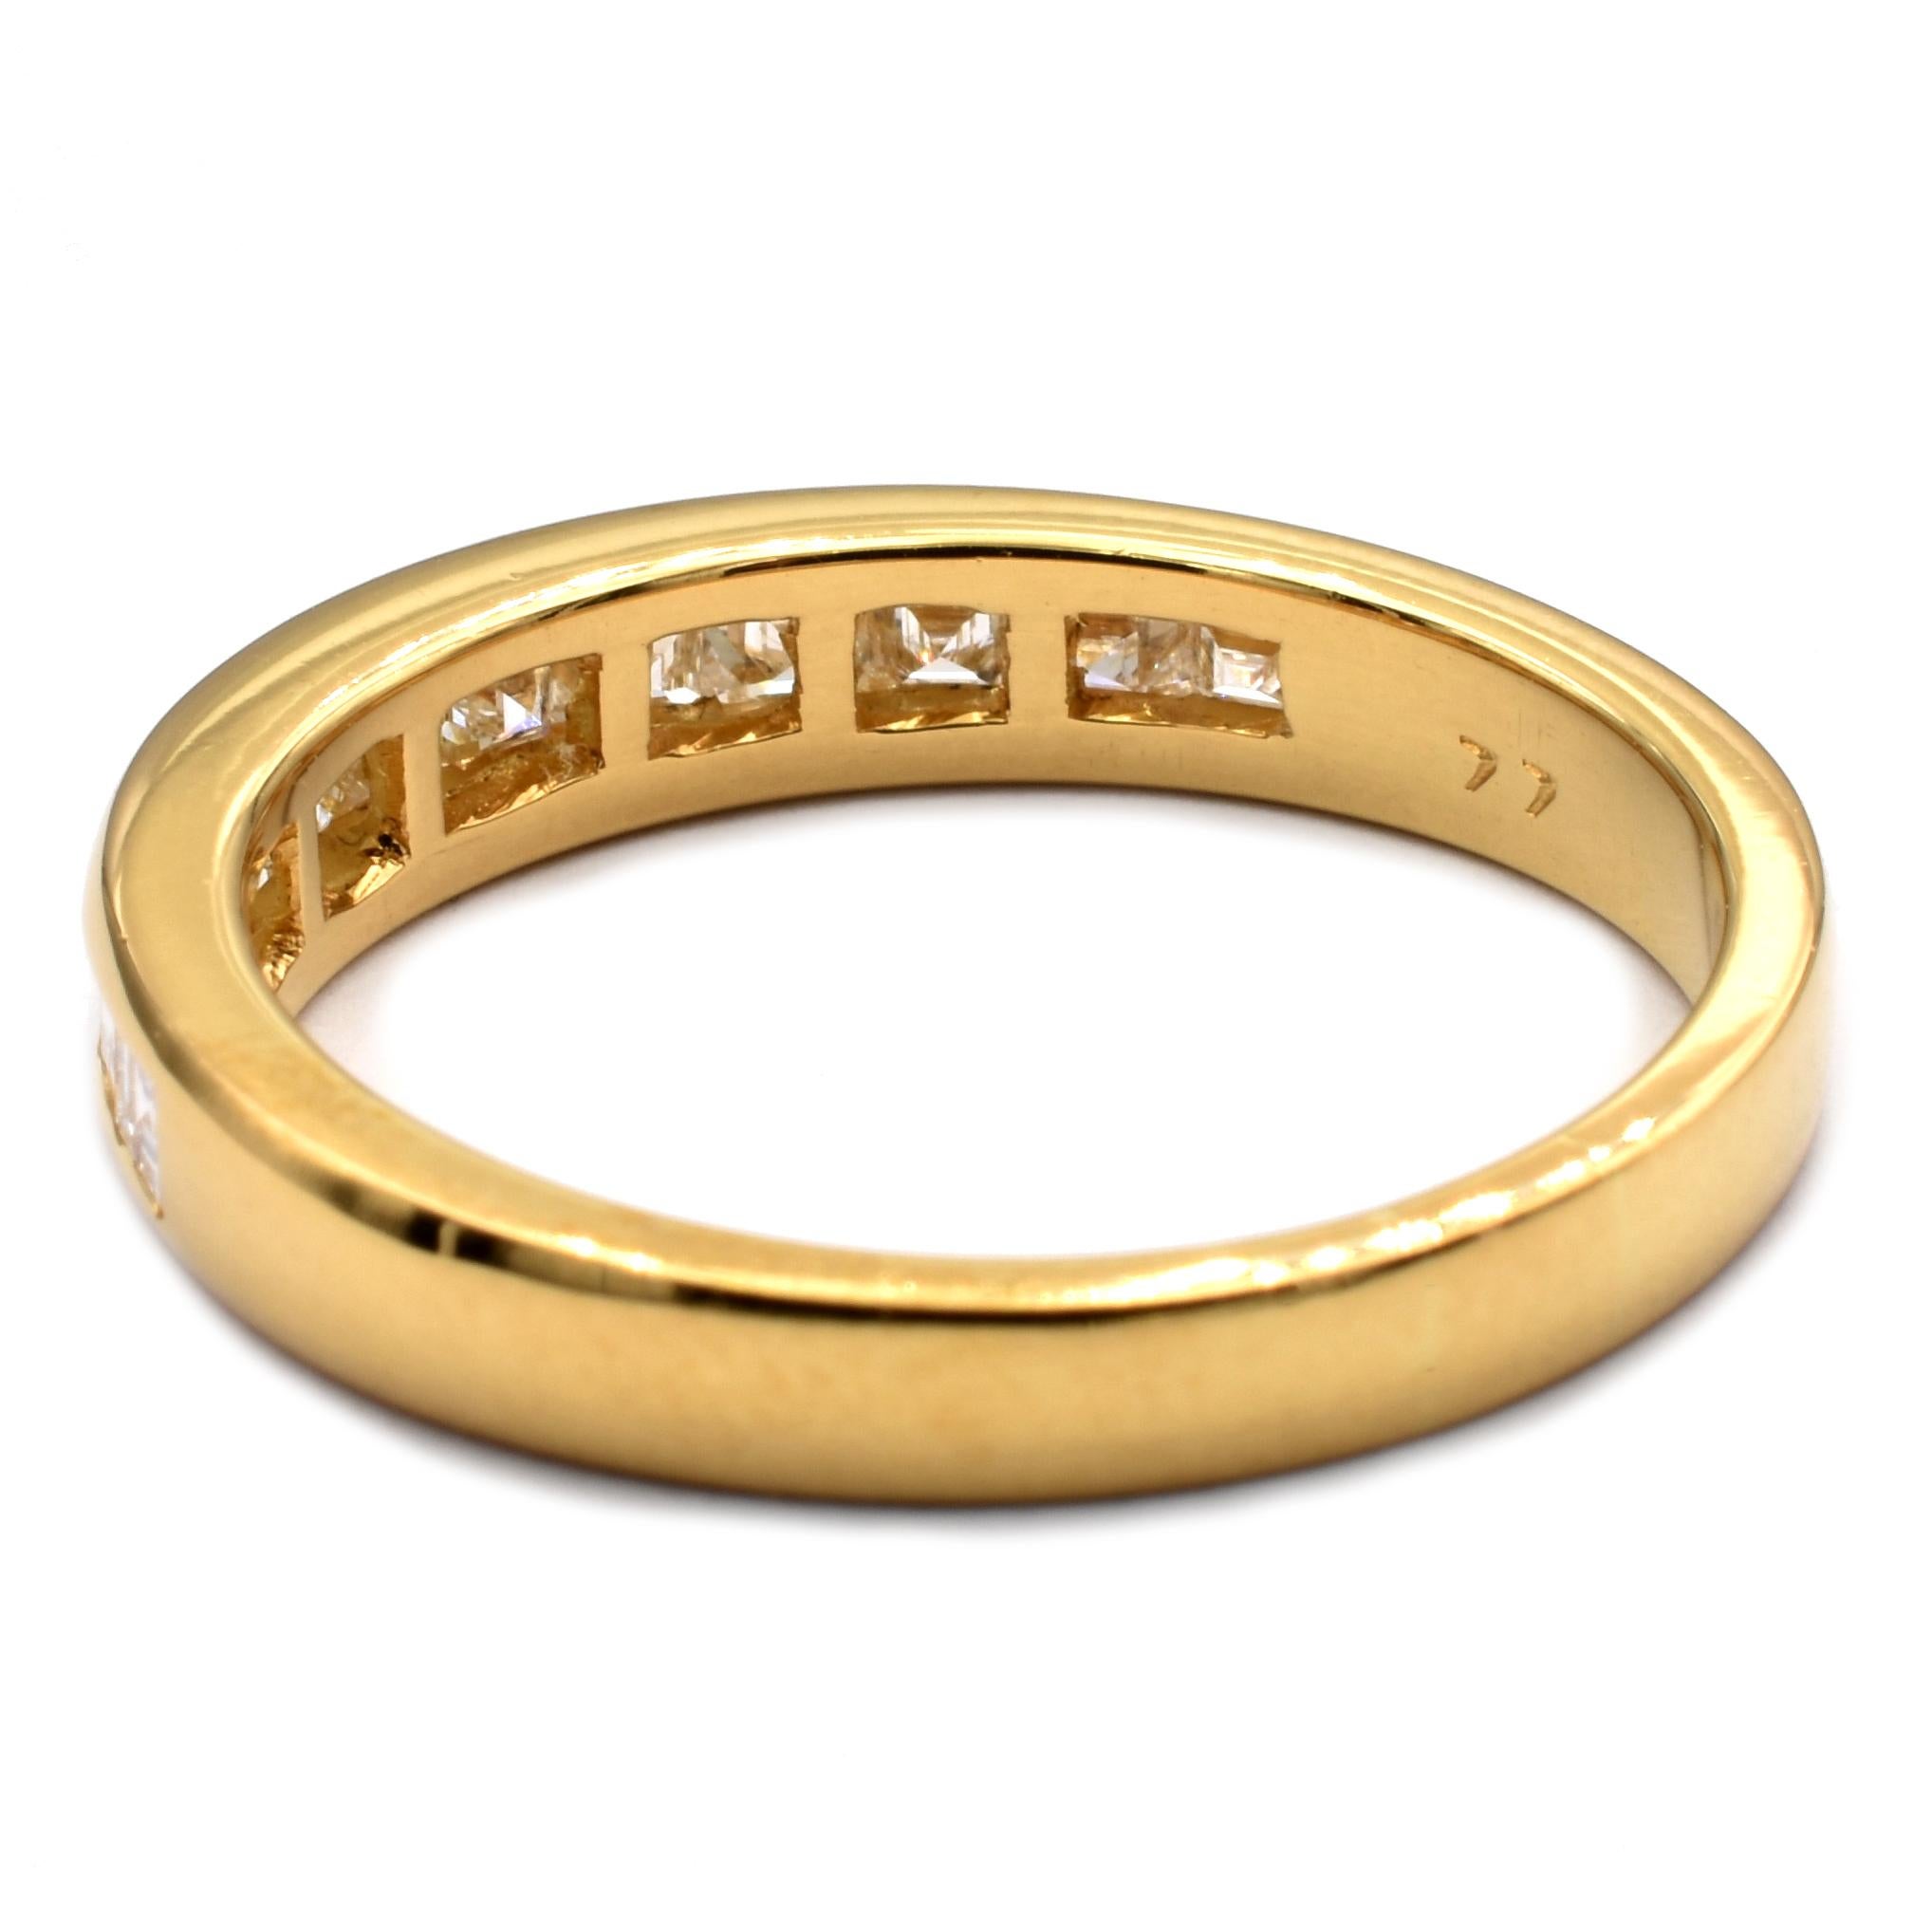 Gilberto Cassola Square Cut Diamonds Yellow Gold Ring Made in Italy For Sale 1